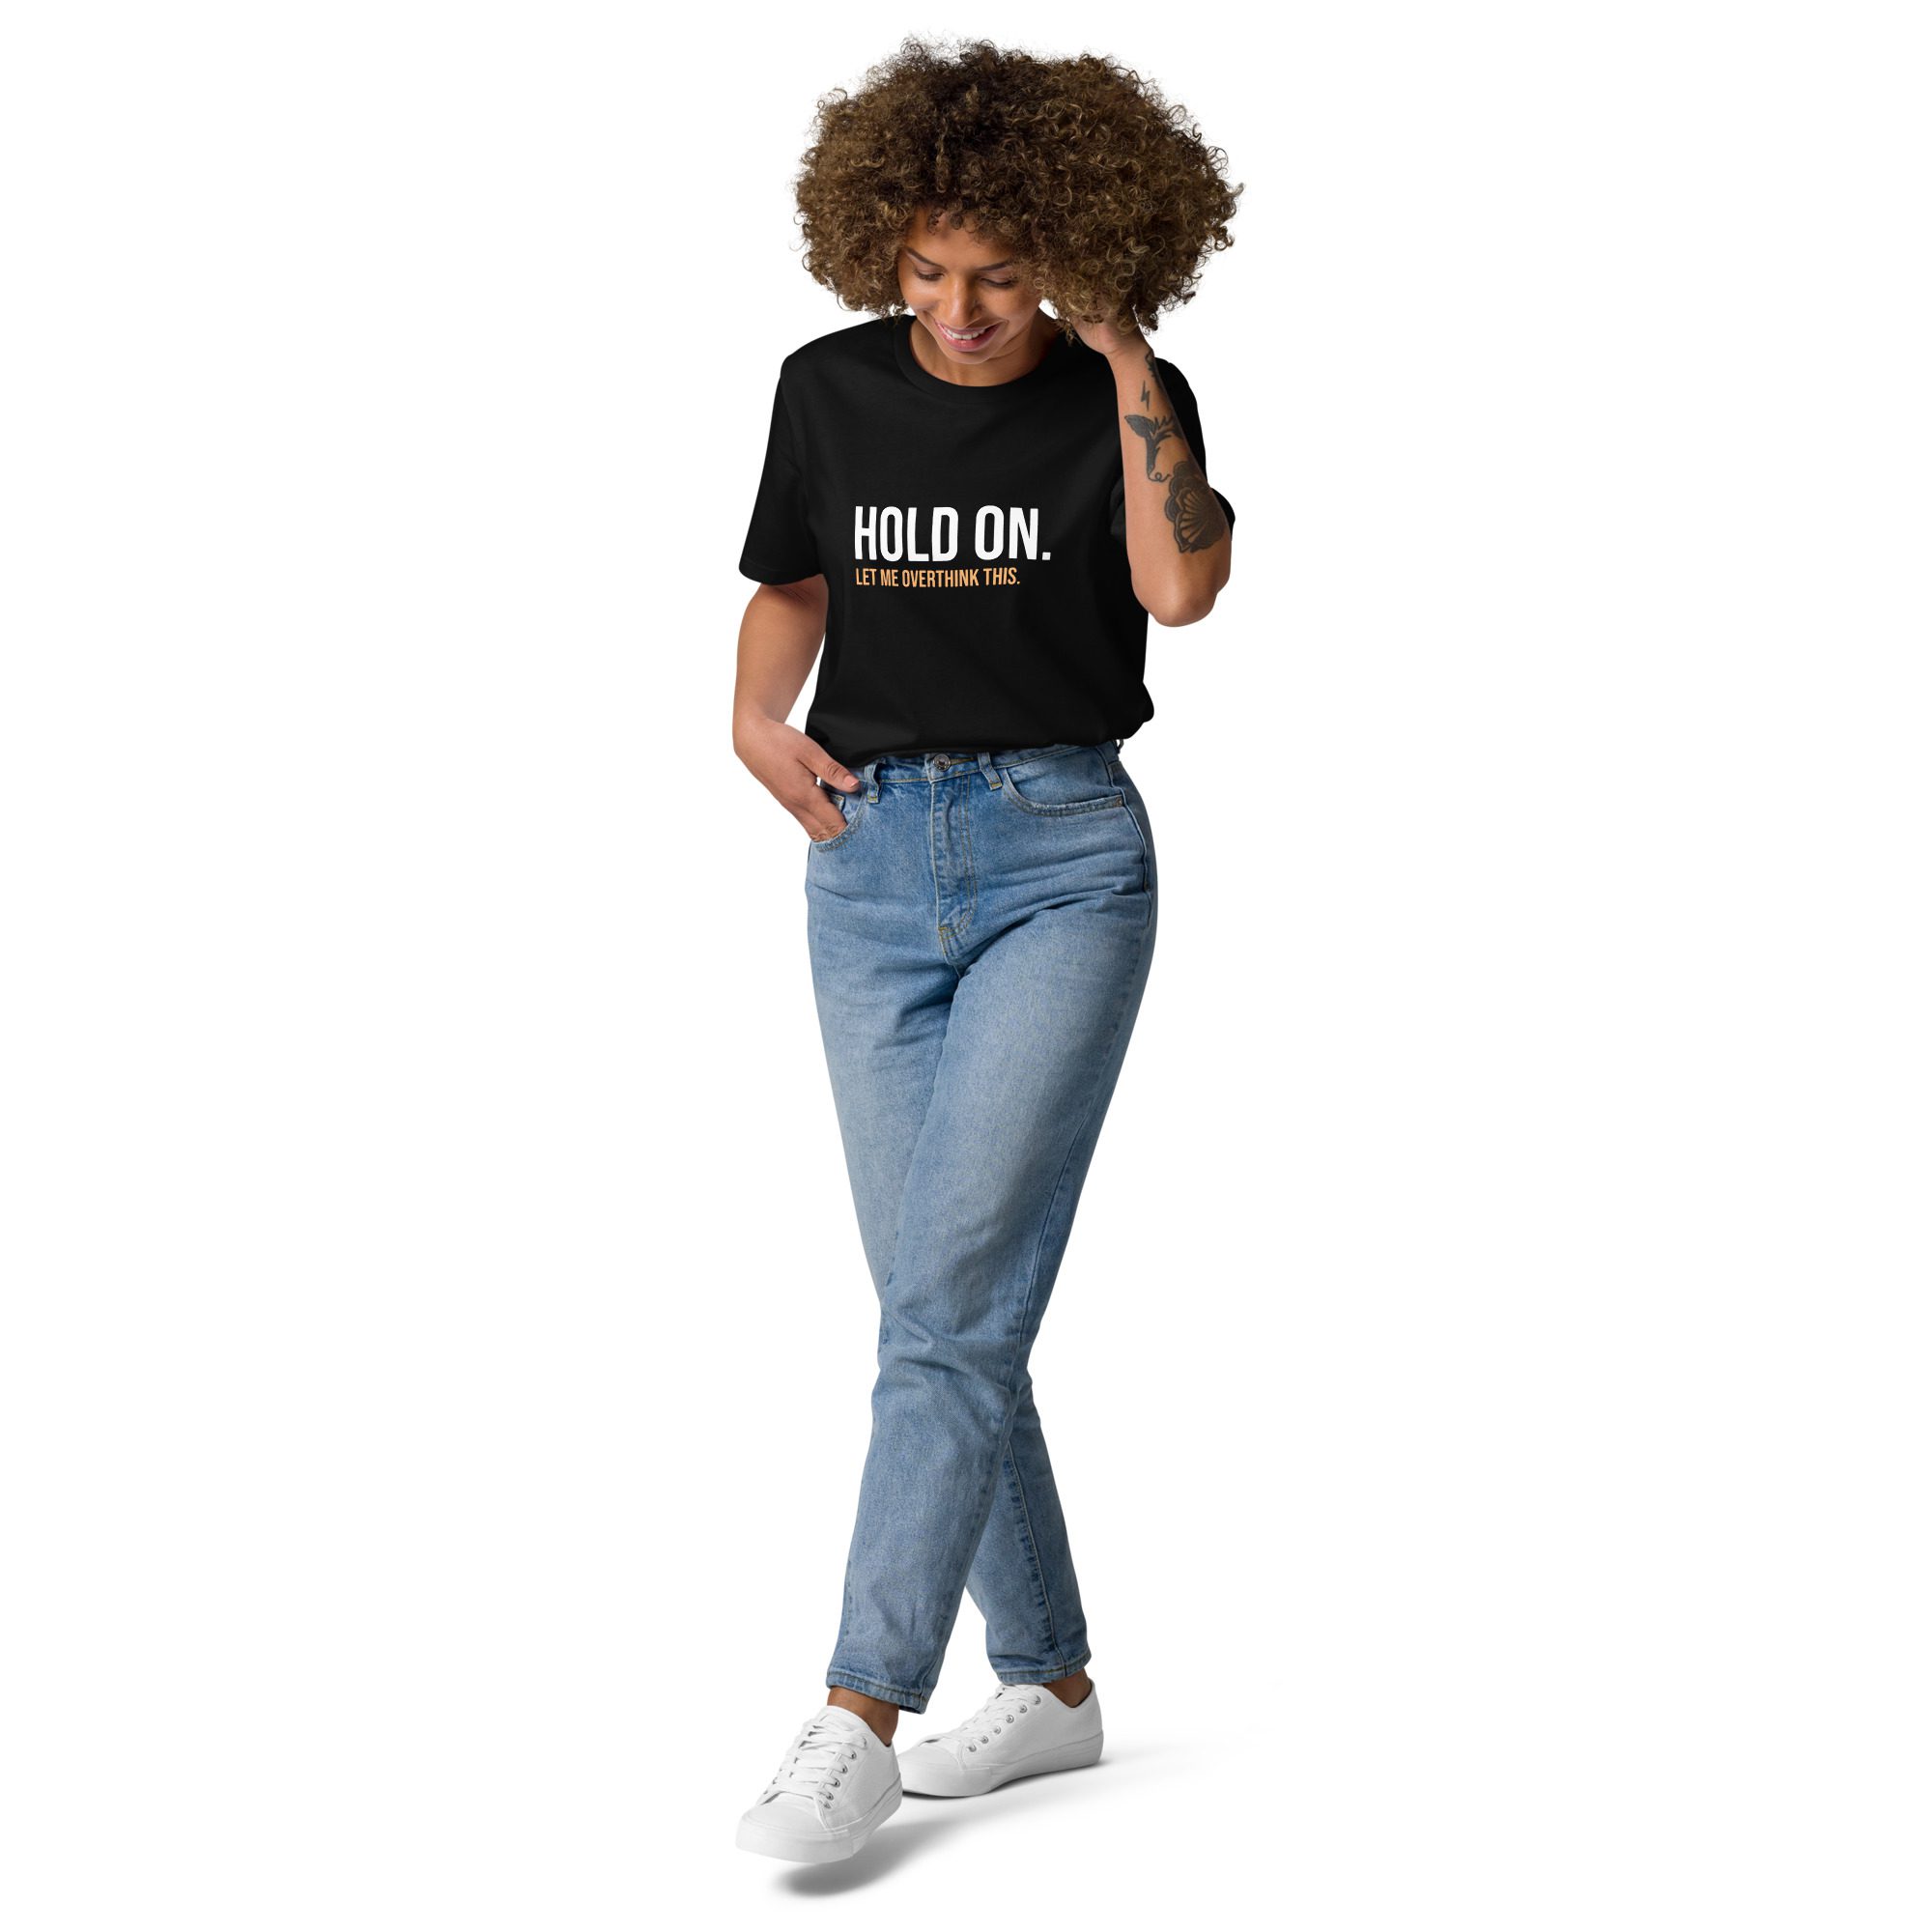 Hold On Let Me Overthink This Unisex Organic Cotton T-shirt